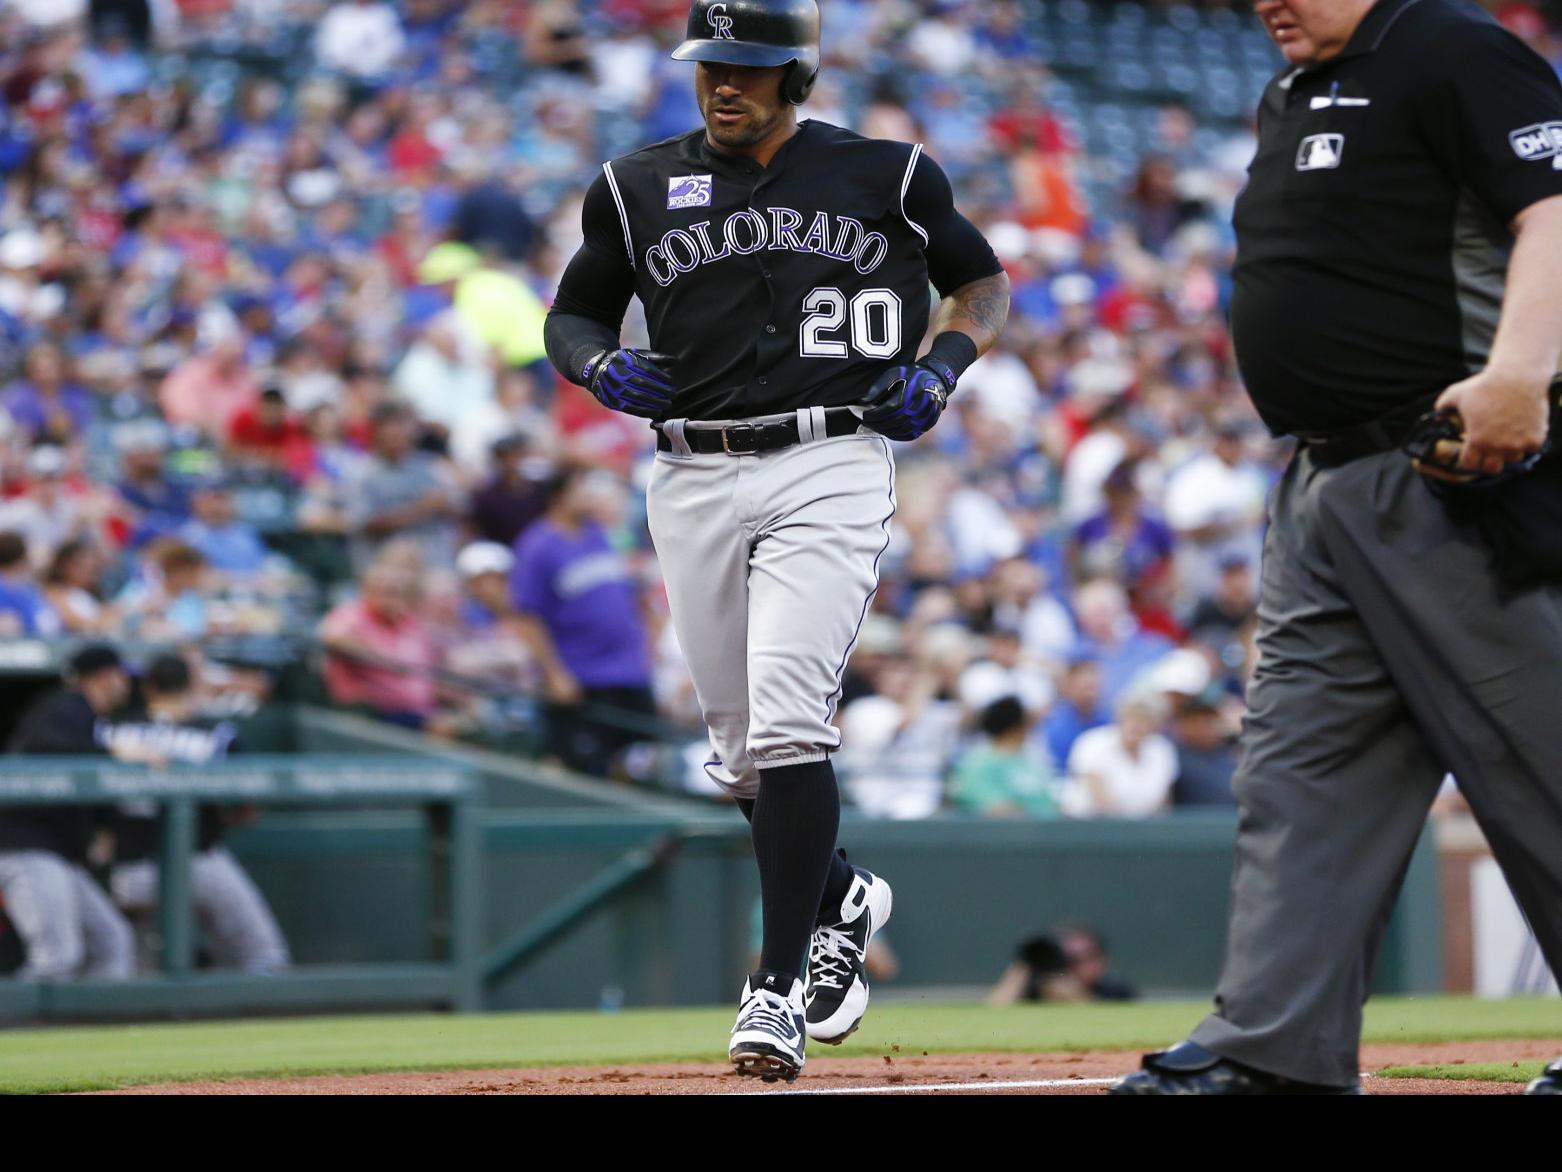 Colorado Rockies defeat Rangers with big 9th inning rally